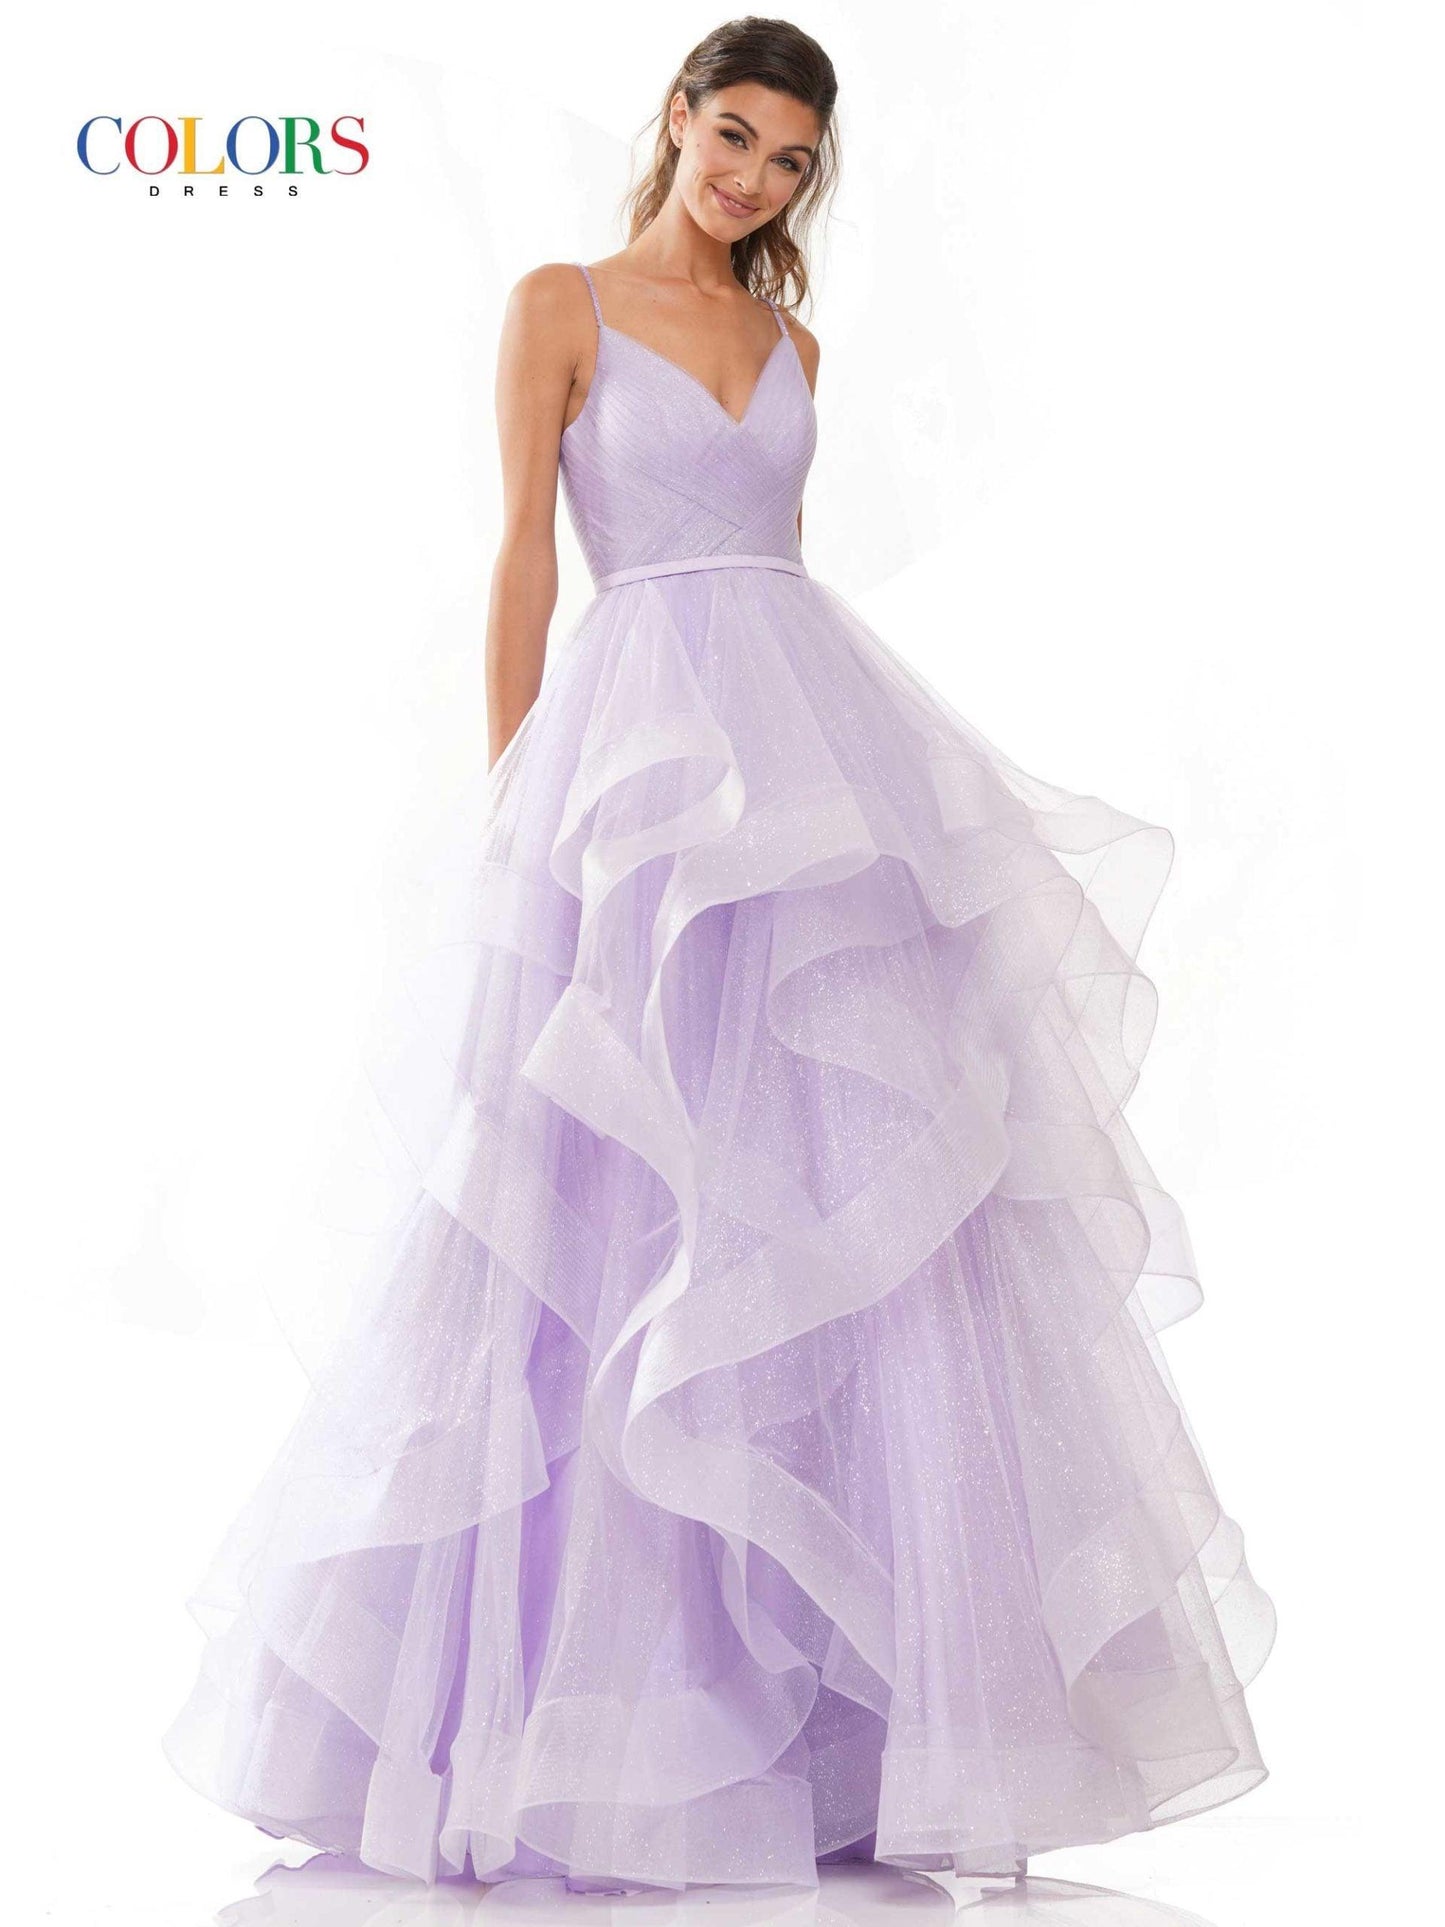 Colors Prom Long Formal Glitter Mesh Ball Gown 2381 - The Dress Outlet